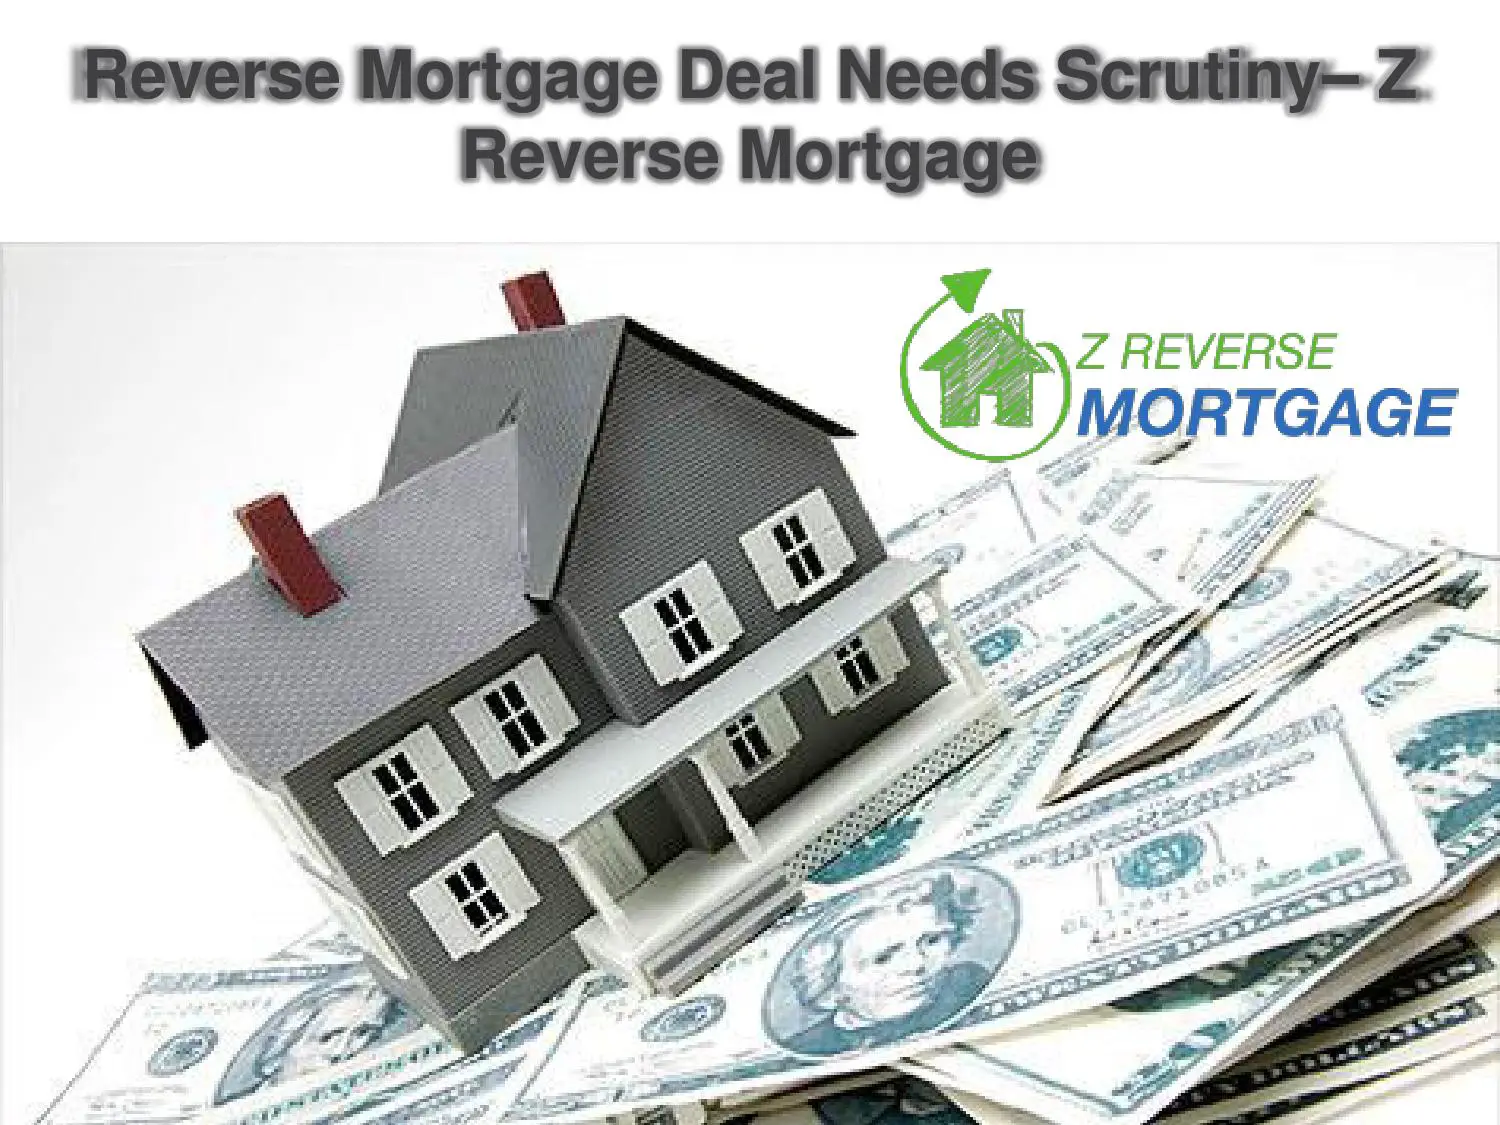 Reverse Mortgage Deal Needs Scrutiny